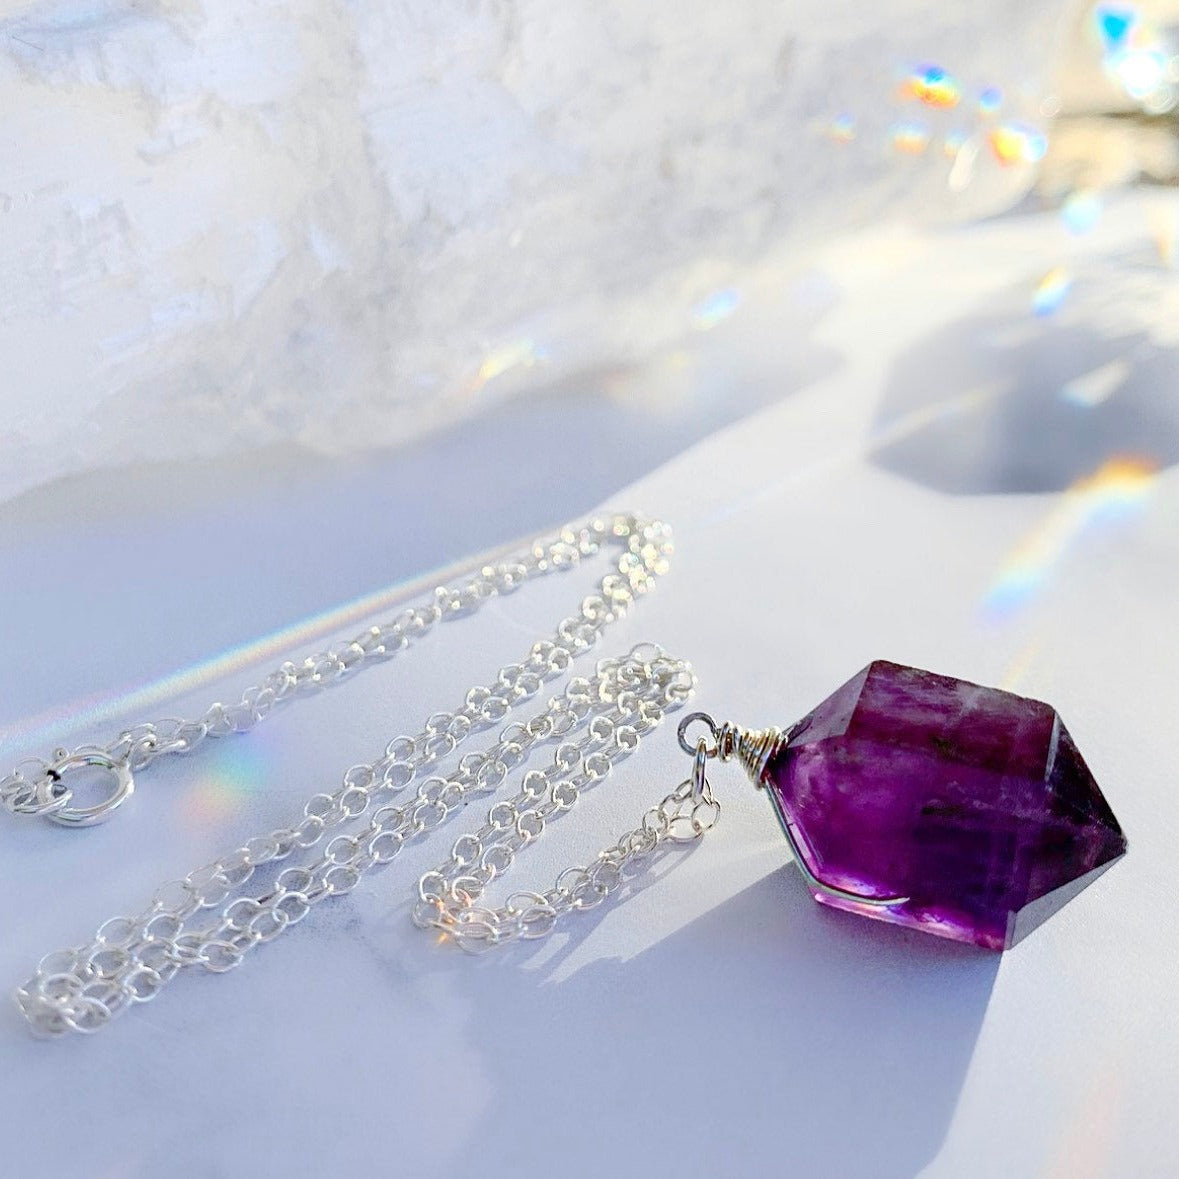 Double Terminated Crystal Necklace, Crystal Nugget Necklace, Healing Citrine Point Necklace, Amethyst Point Pendant, Rose Quartz Nugget